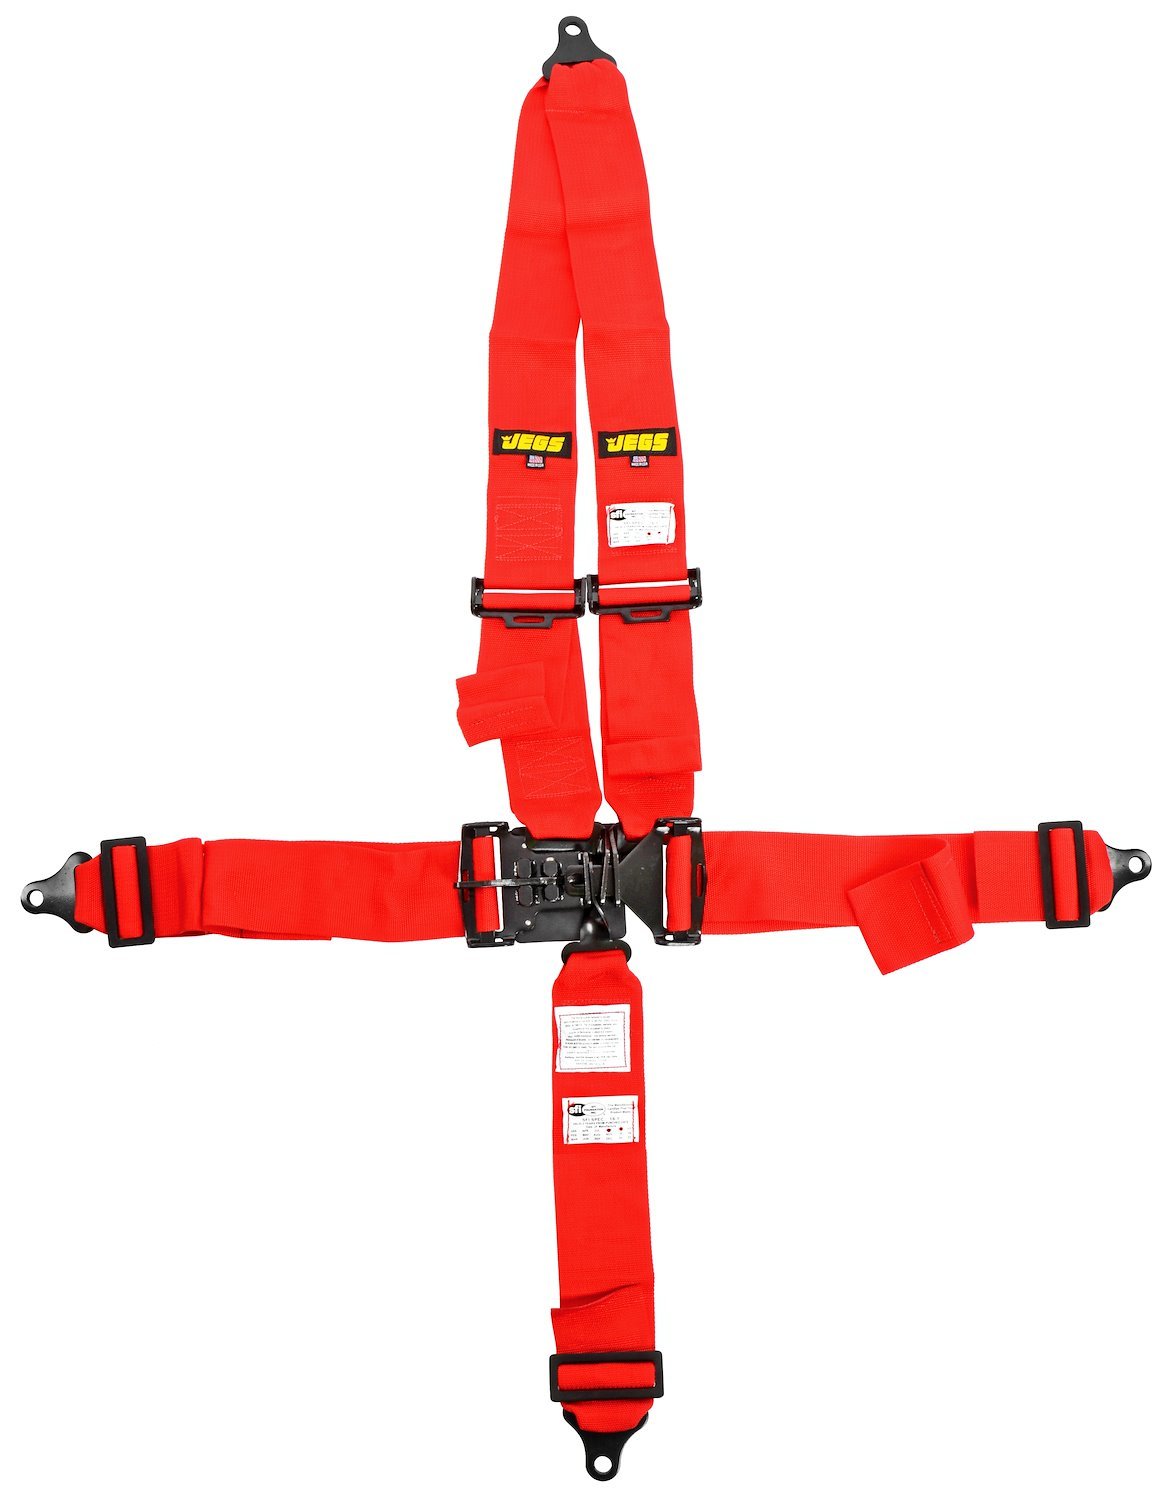 Red Latch & Link Ultra Series Harness 4-Point Design